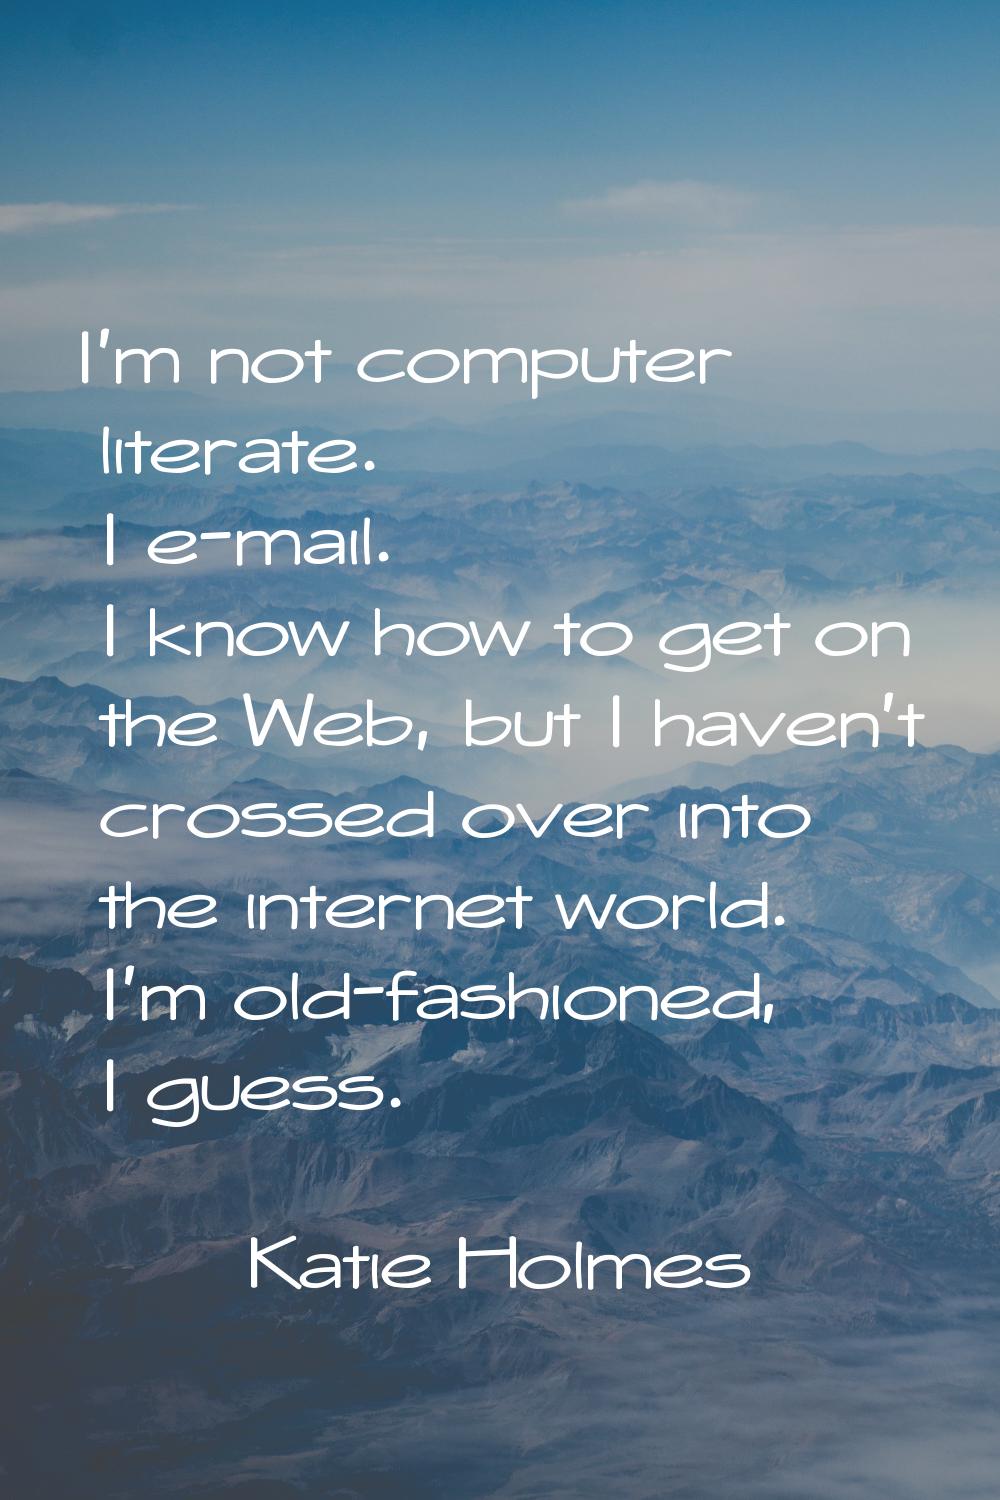 I'm not computer literate. I e-mail. I know how to get on the Web, but I haven't crossed over into 